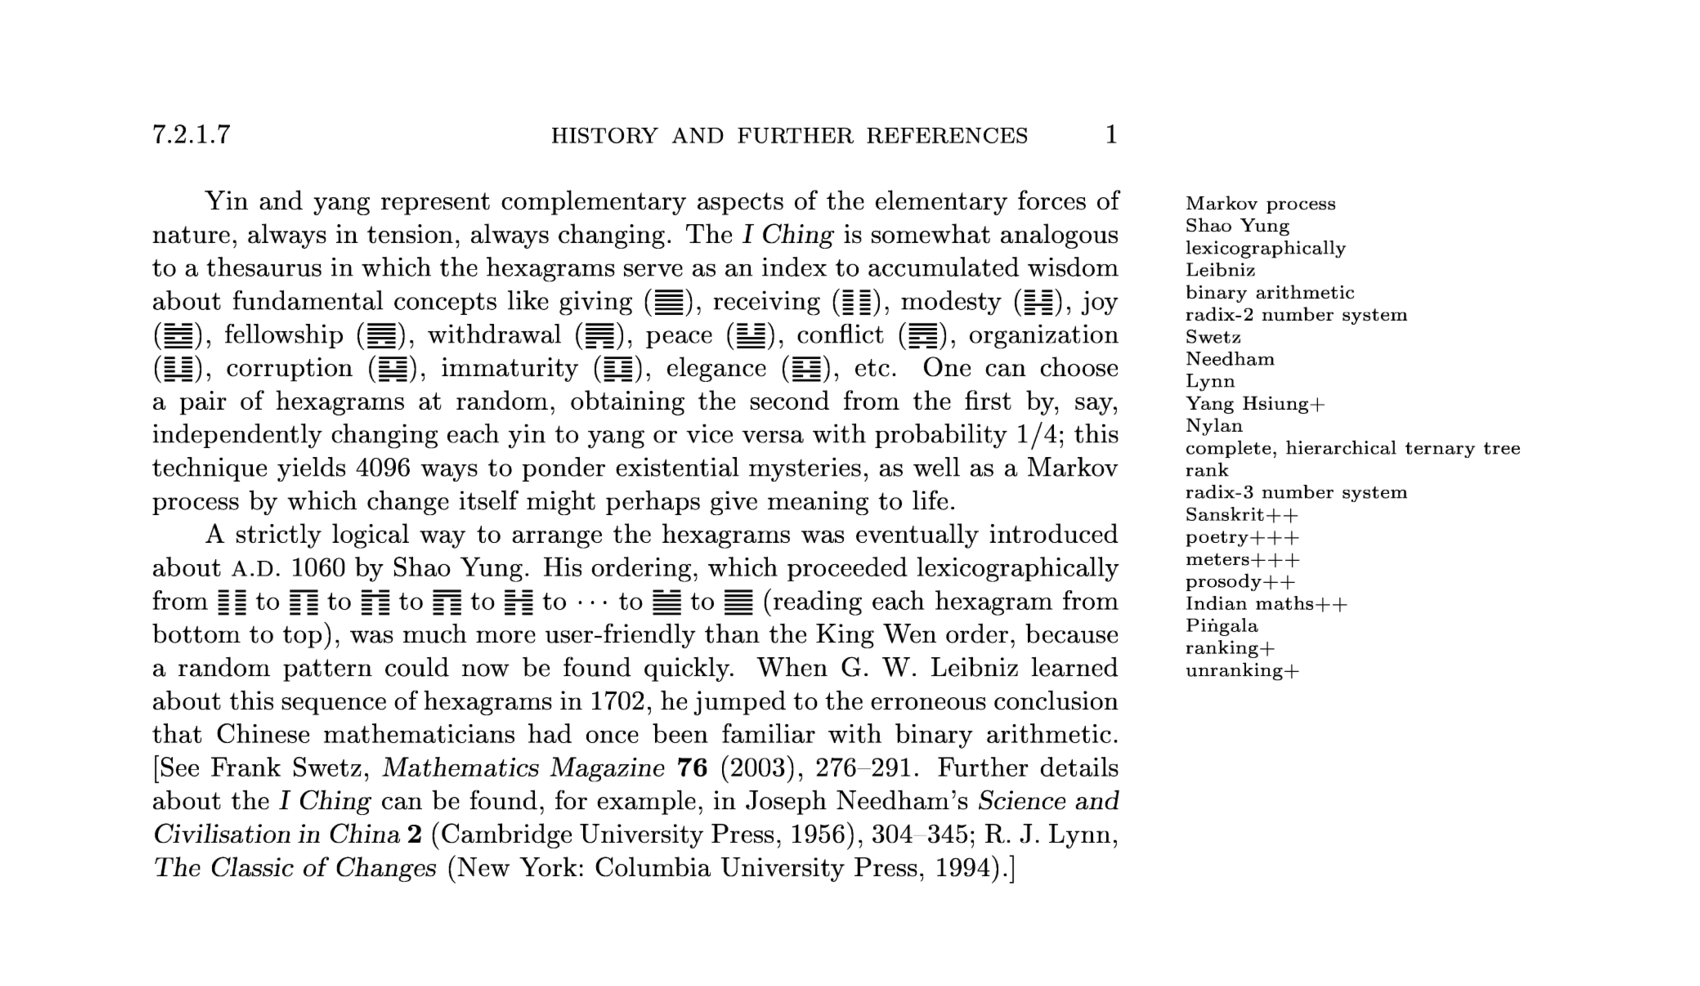 Margin notes showing keywords for discussion of Chinese/​Indian algorithmic history in Knuth.